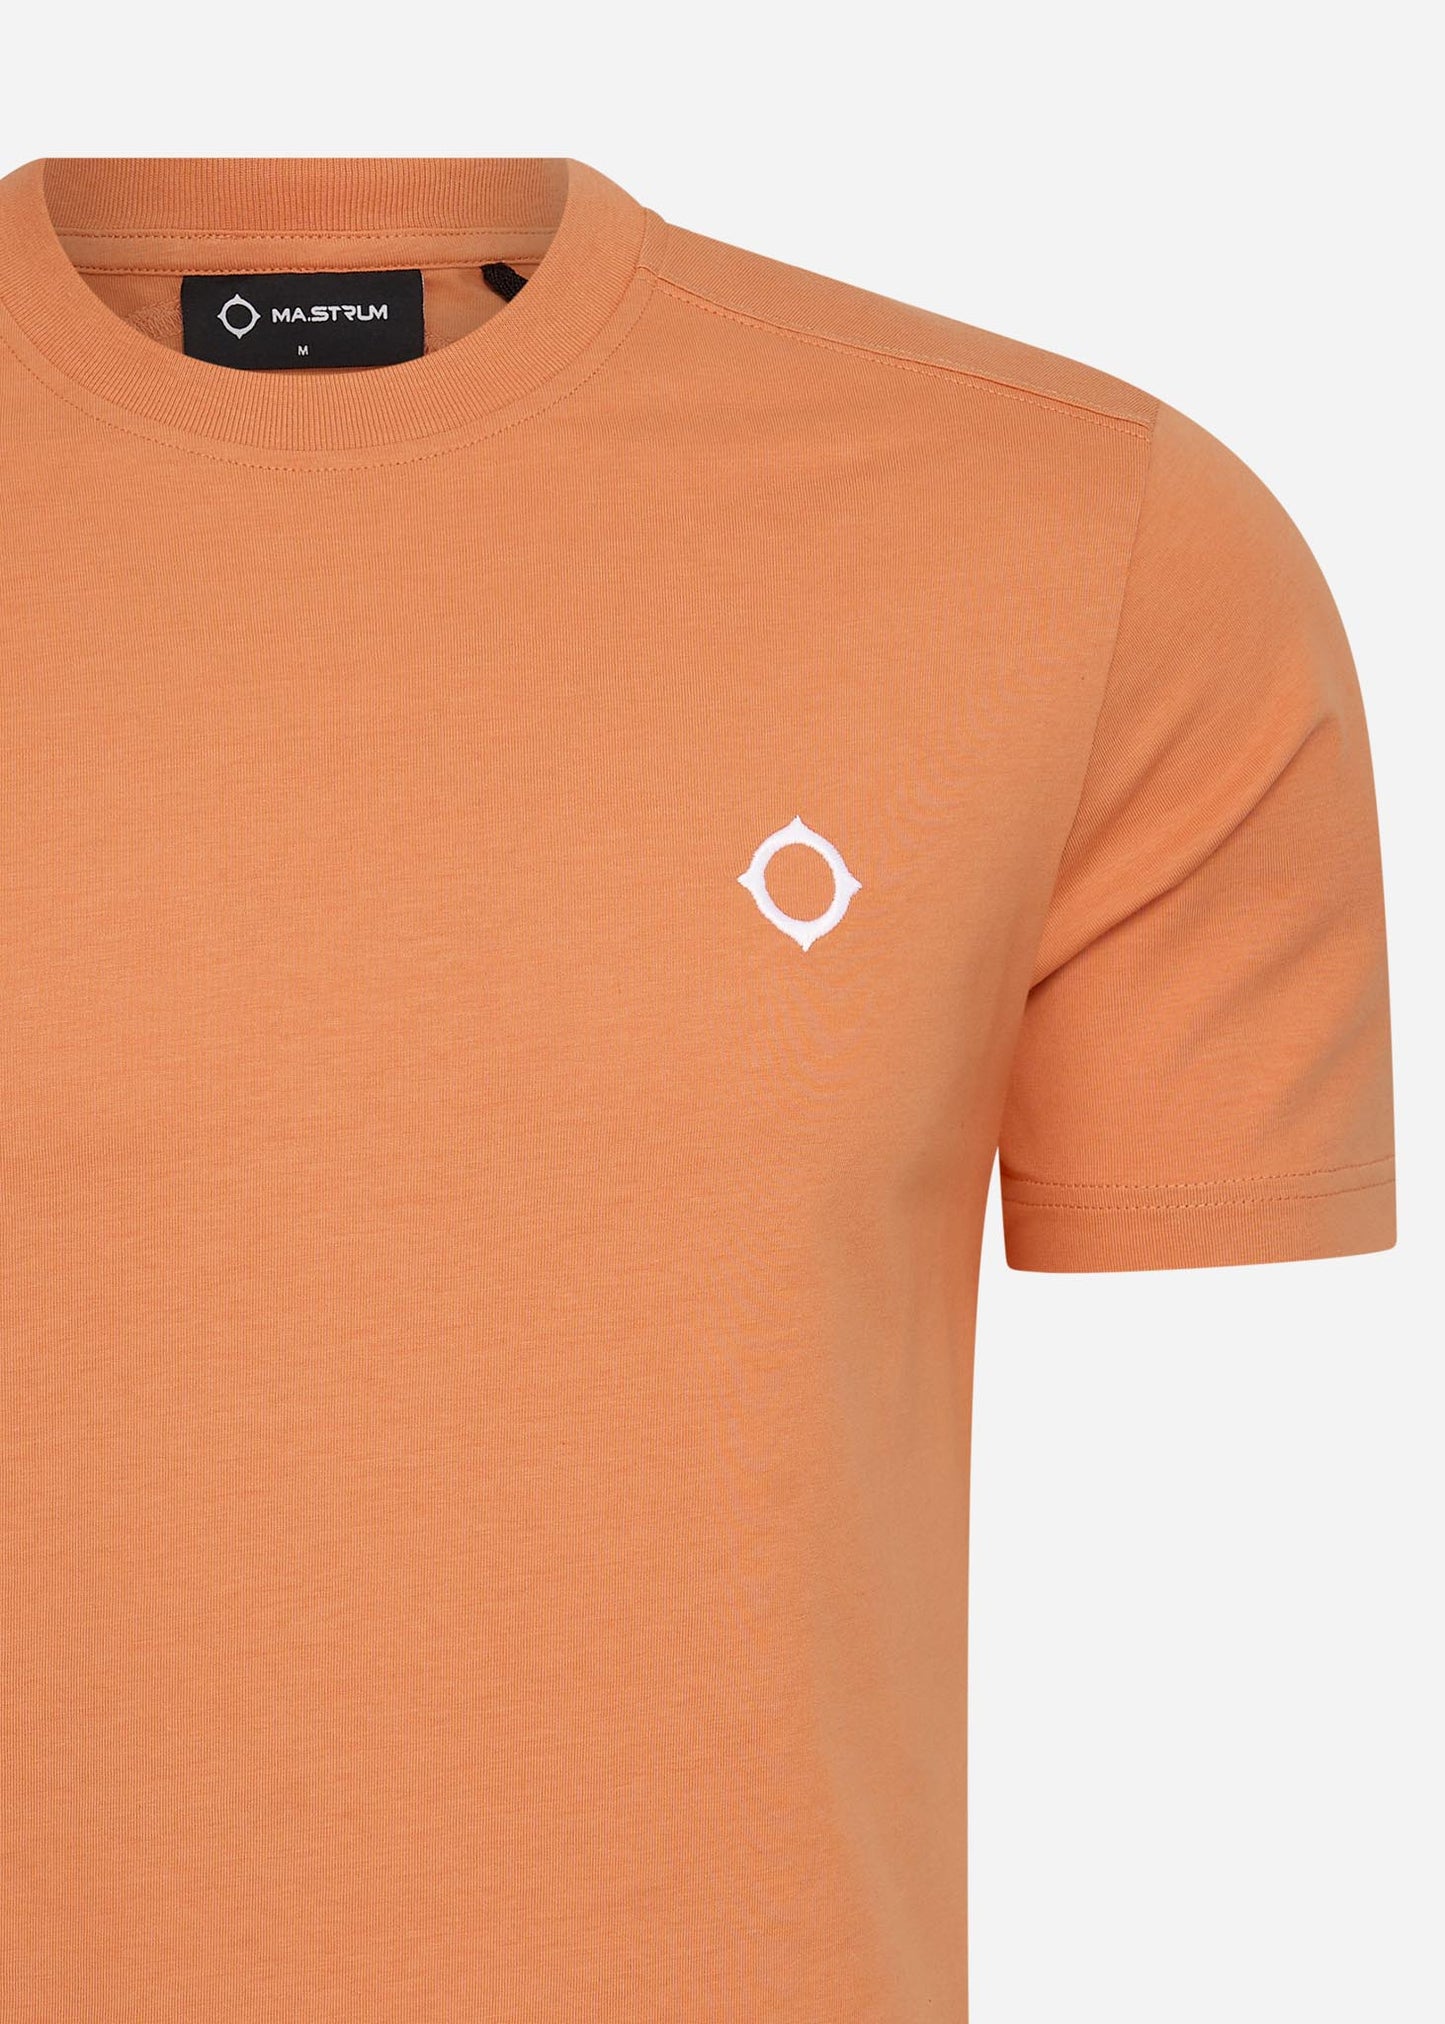 SS icon tee - coral gold